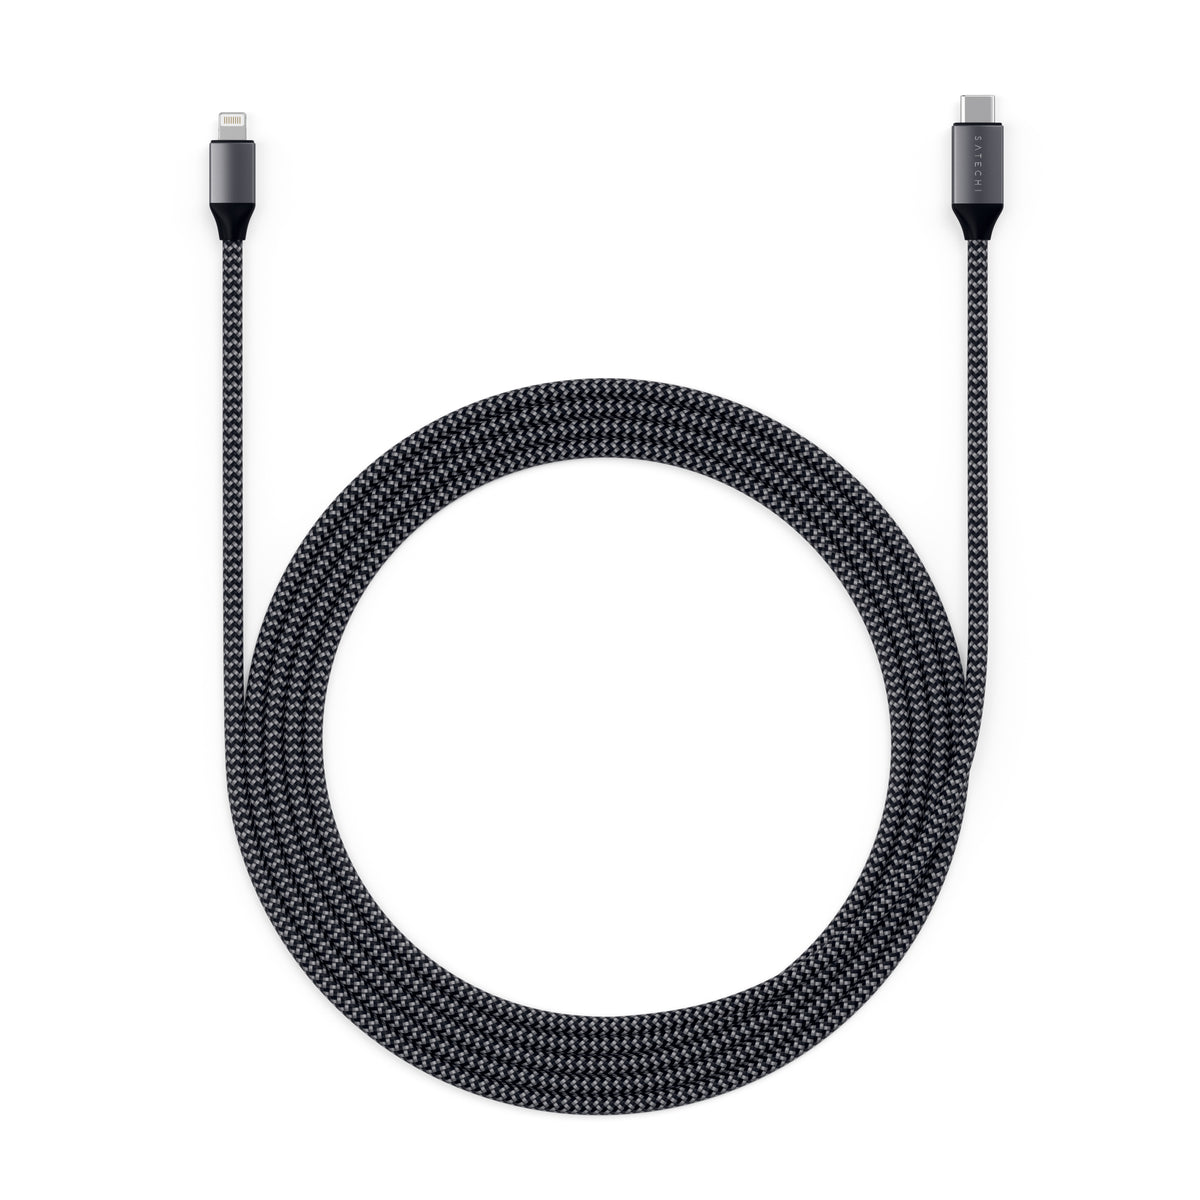 SATECHI USB-C to Lightning Charging Cable 6ft - Black